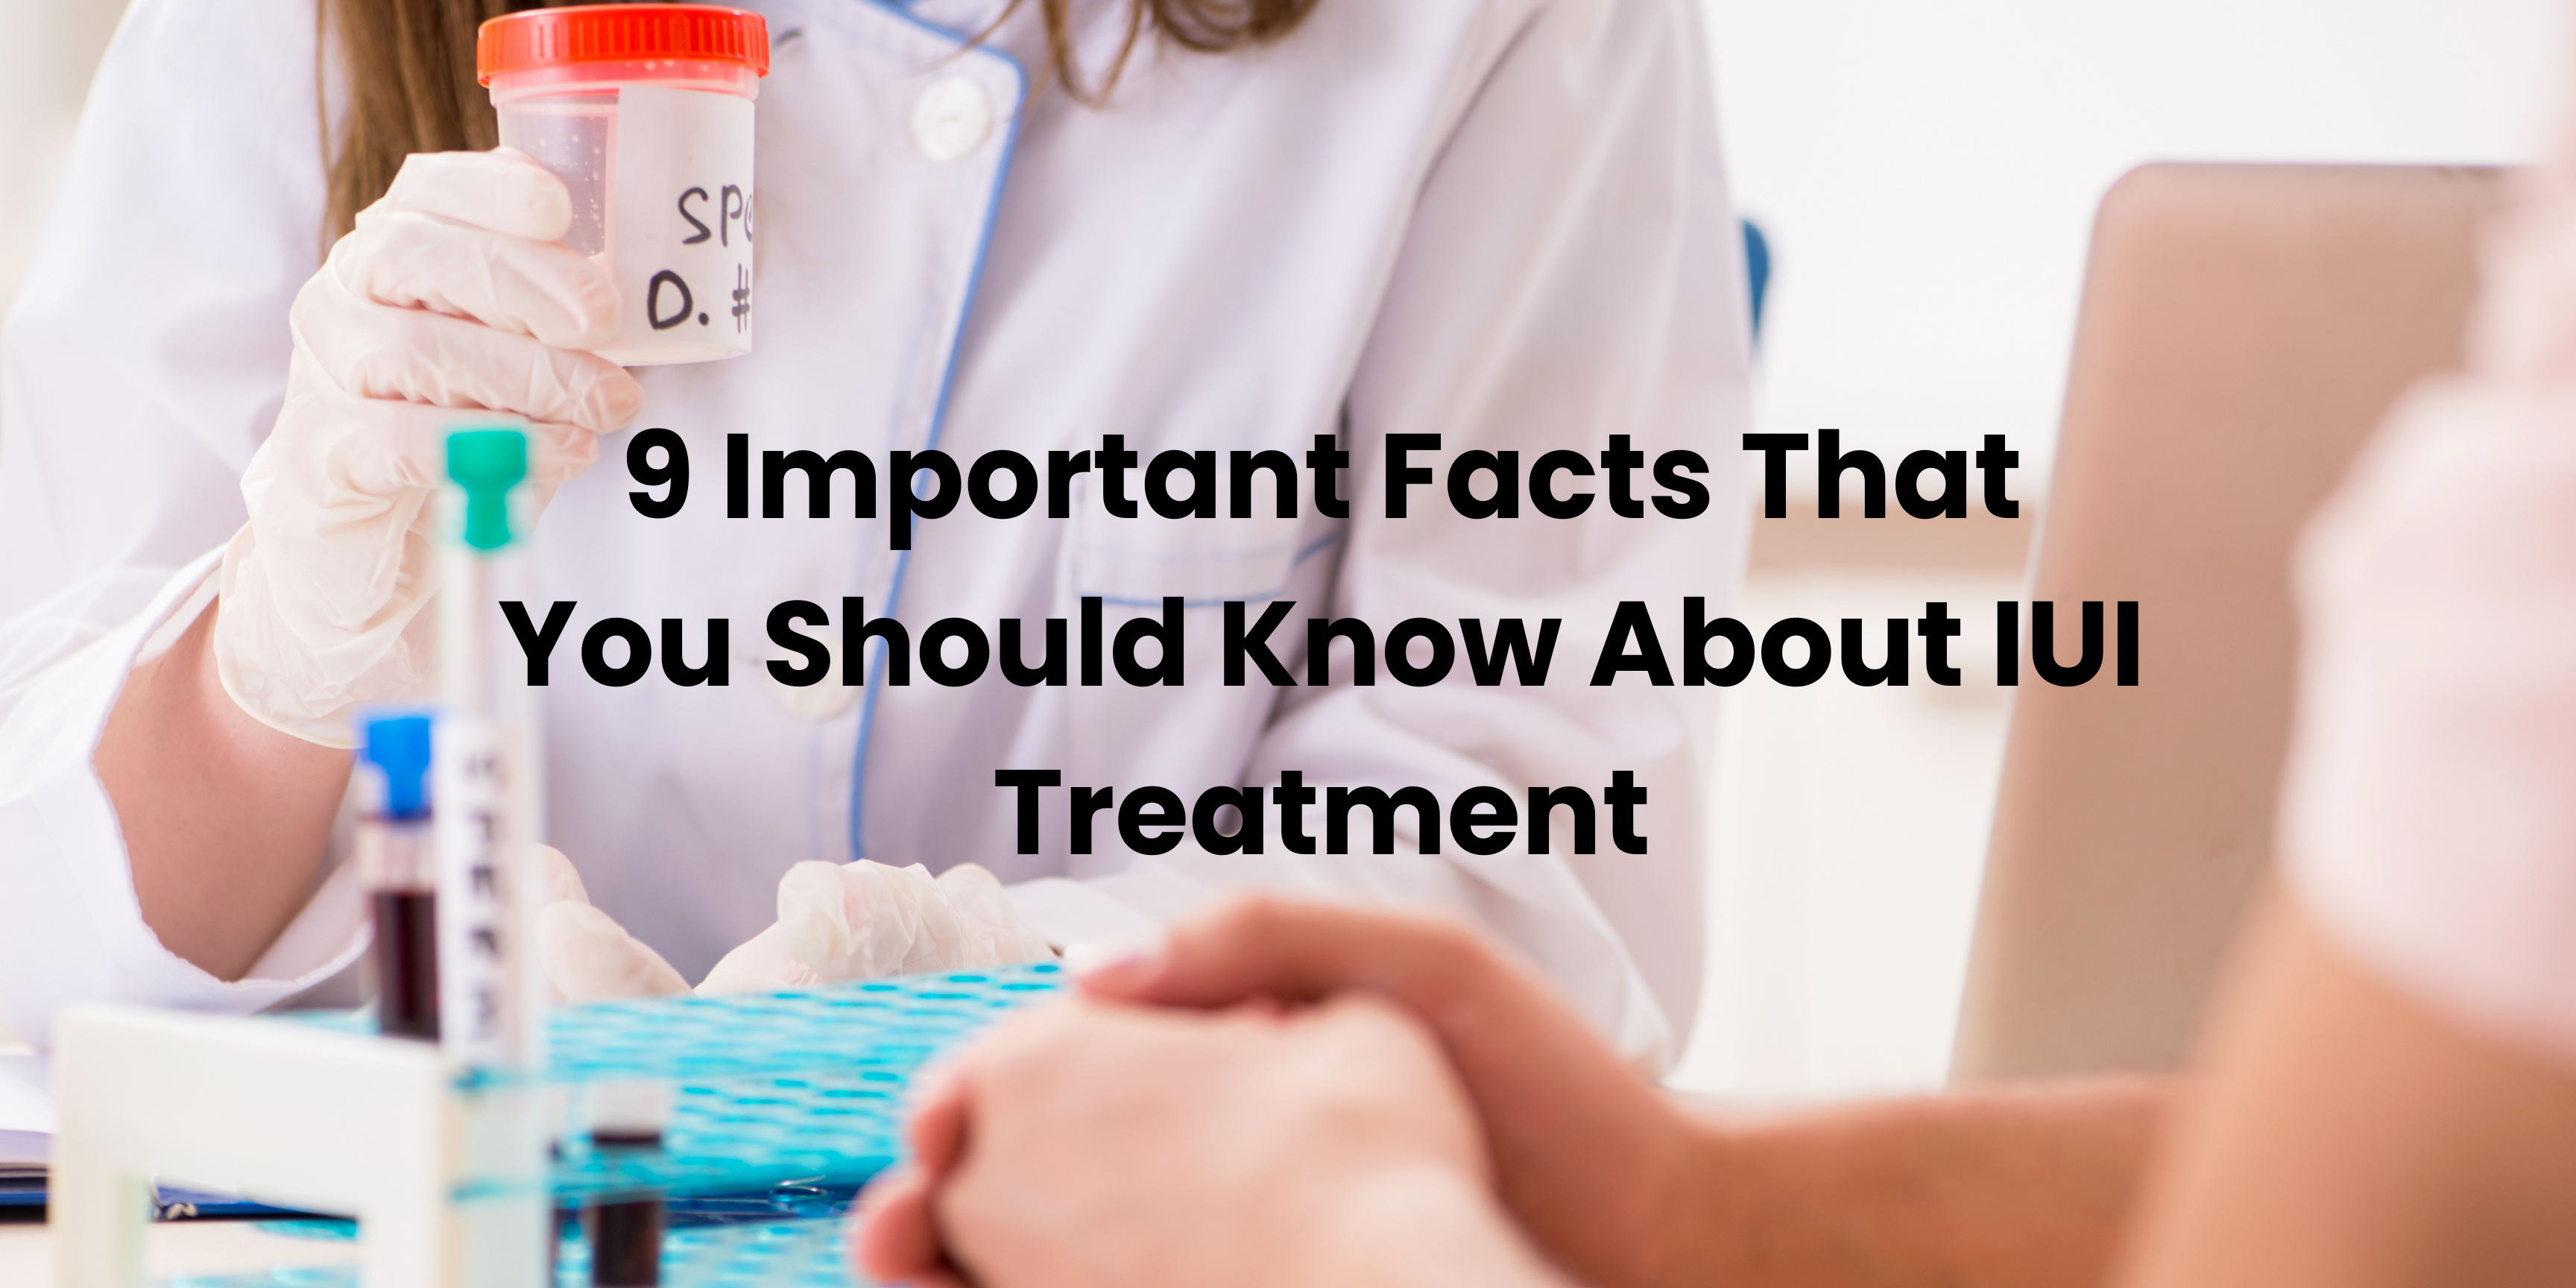 9 Important Facts That You Should Know About IUI Treatment (1)